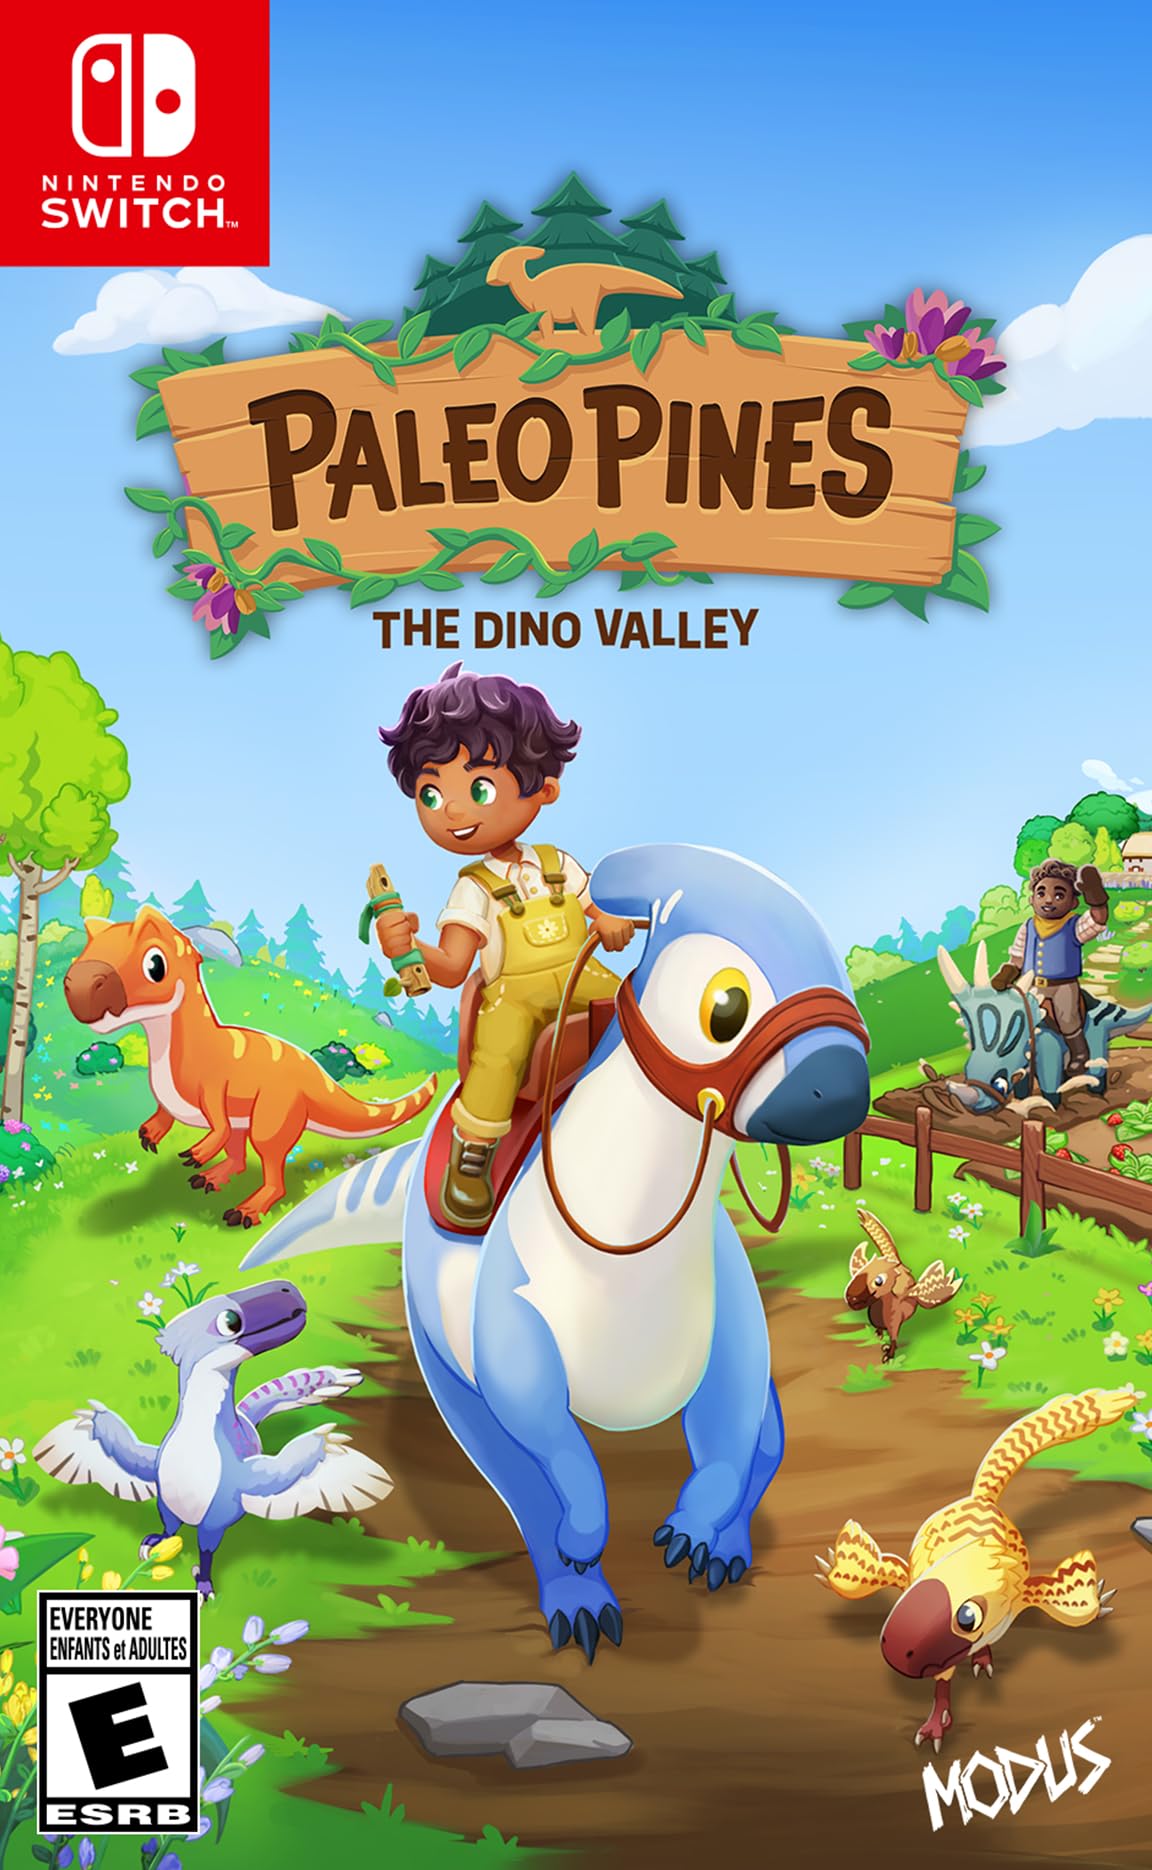 Paleo Pines: The Dino Valley (Nintendo Switch) $19.70 + Free Shipping w/ Prime or on orders over $35